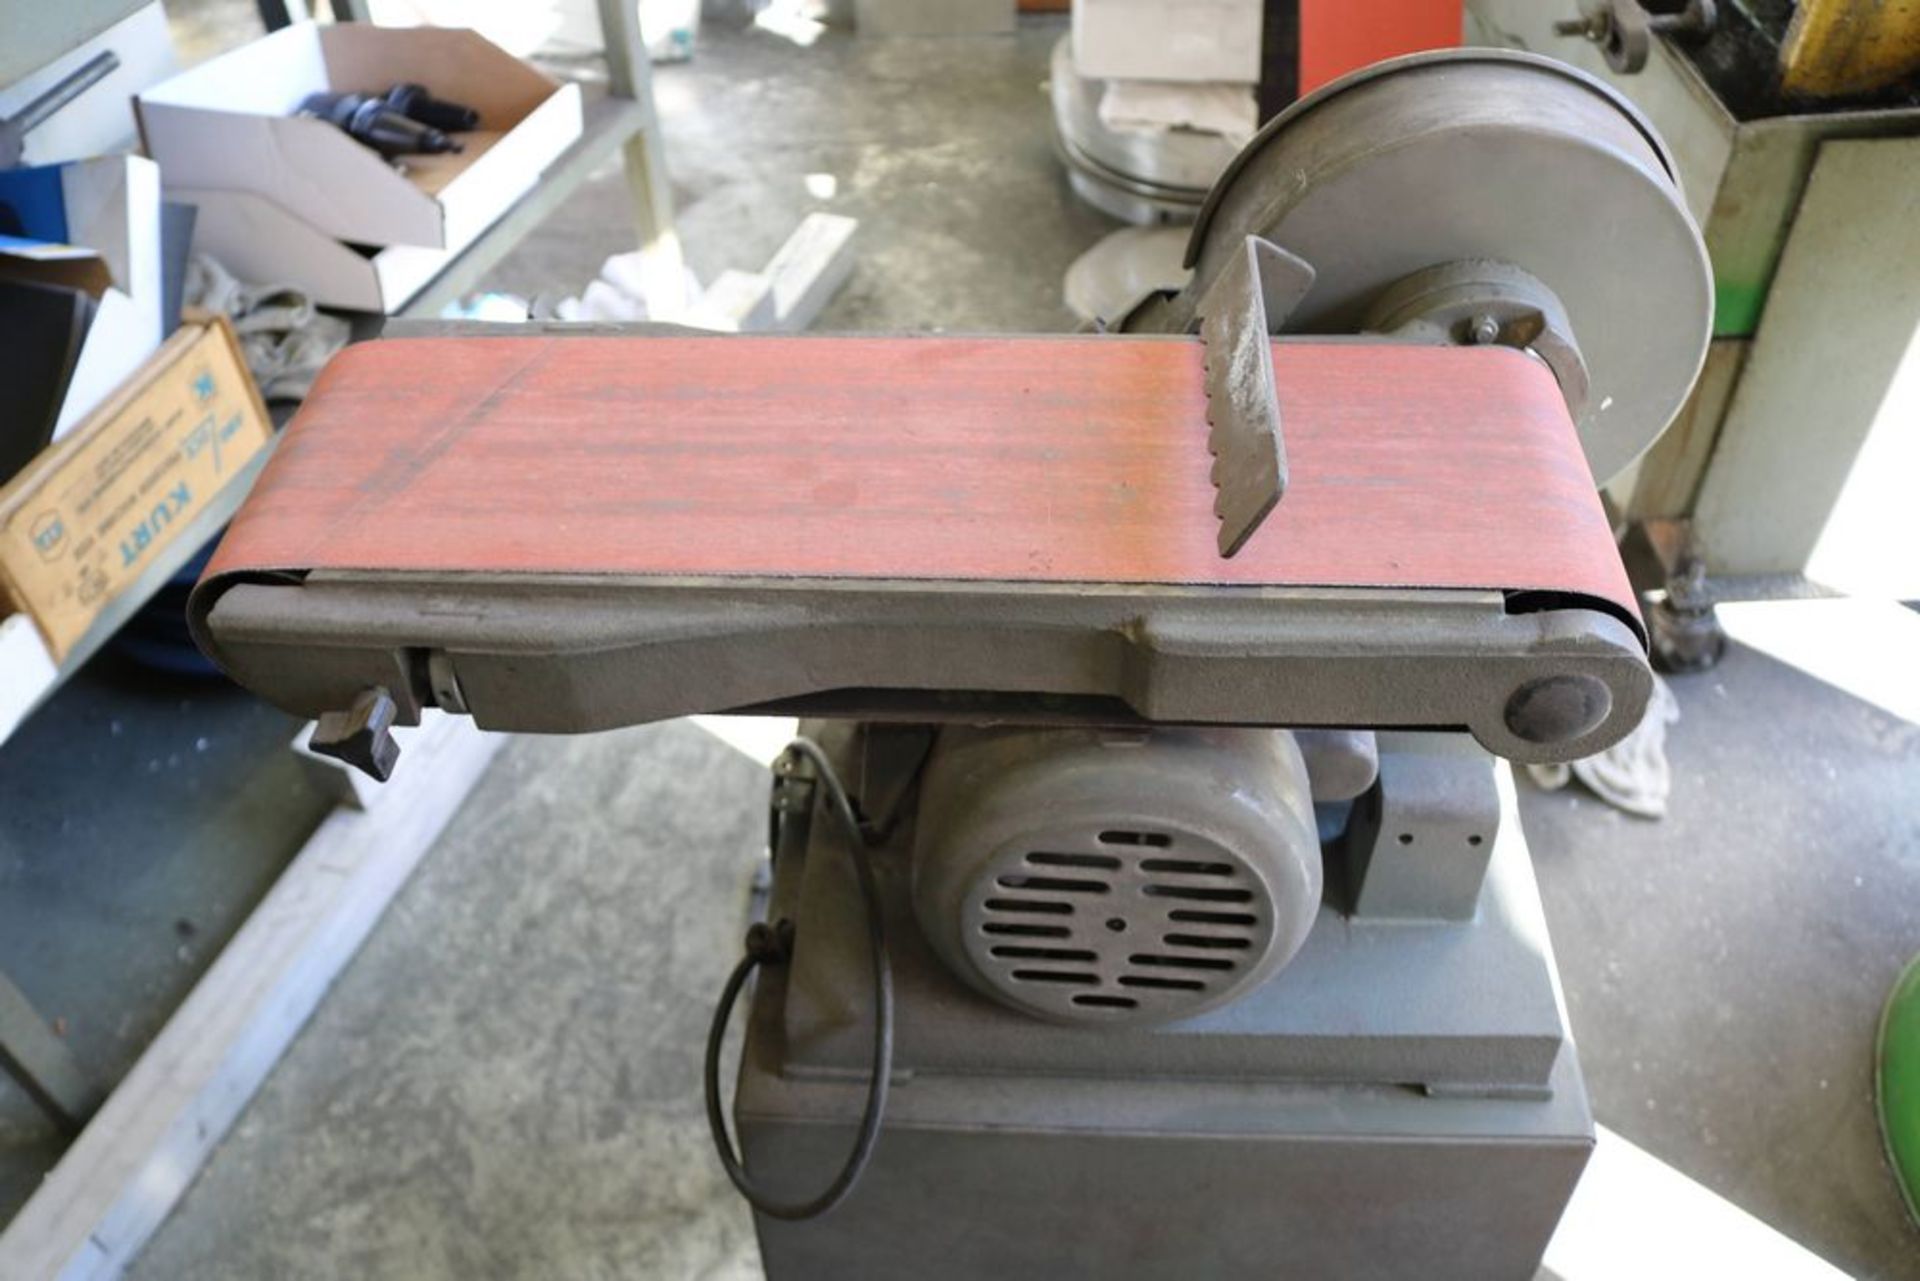 1995 Rotland 6" x 9" Belt and Disc Sander, 1/2 HP with Extra Sanding Belt - Image 4 of 5